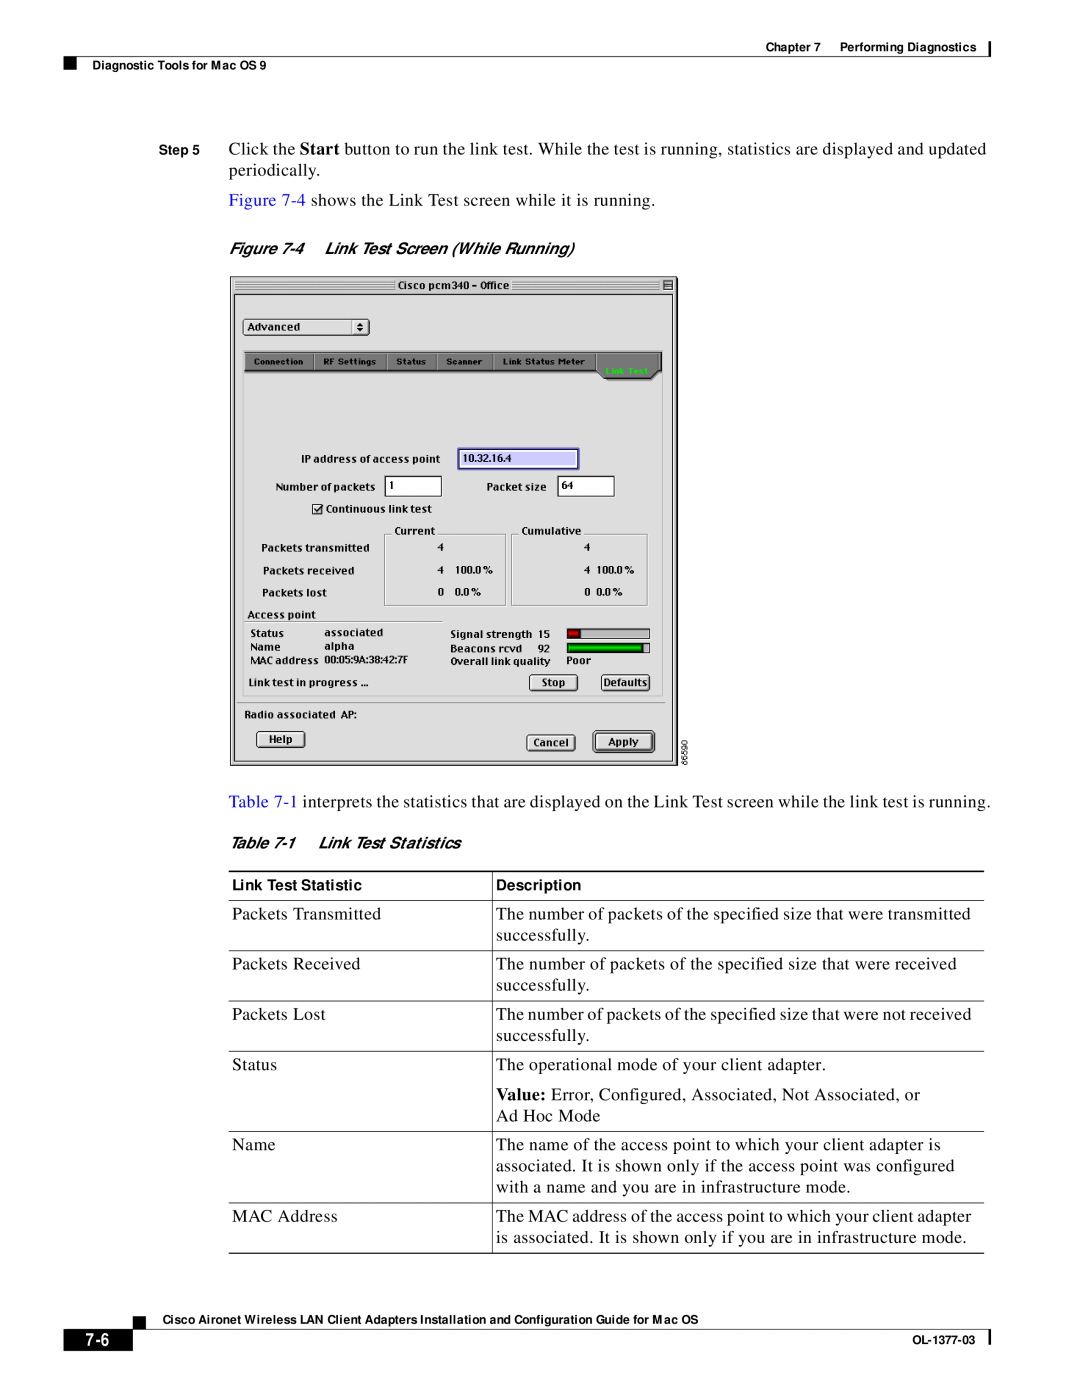 Cisco Systems OL-1377-03 manual Description, 4 Link Test Screen While Running, 1 Link Test Statistics 